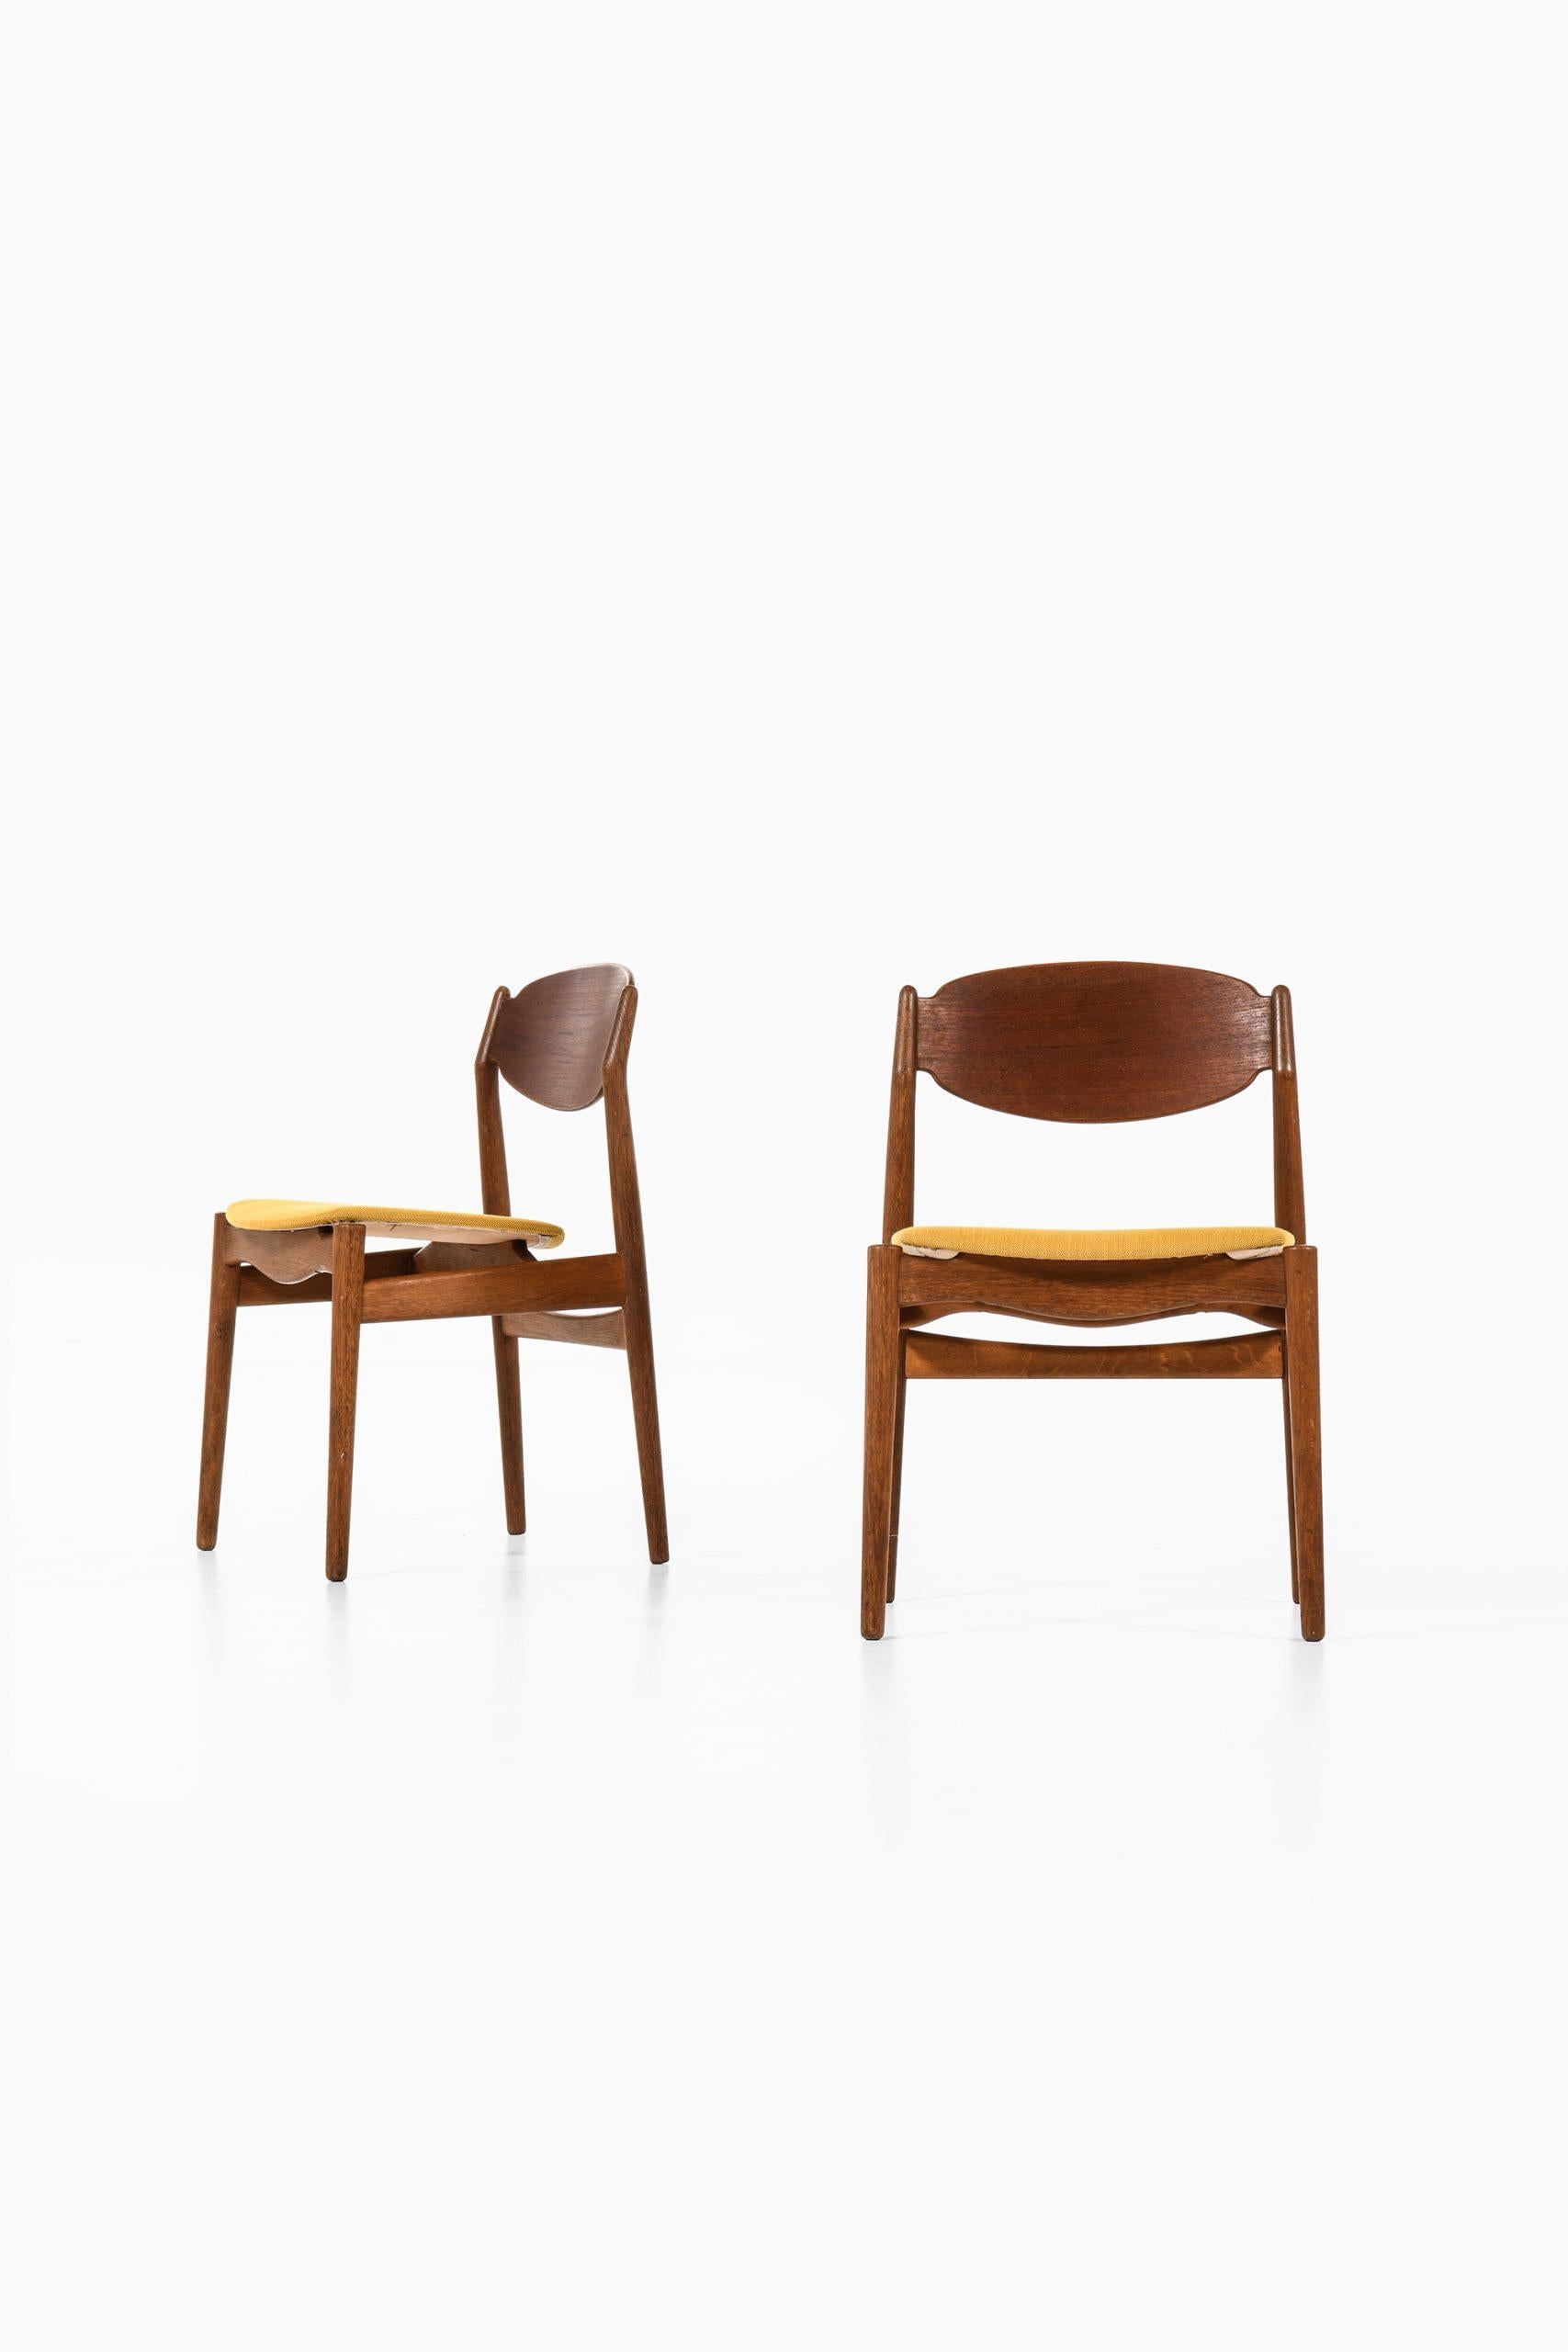 Rare set of 6 dining chairs designed by Erik Buck. Produced by Vamo Møbelfabrik in Denmark.